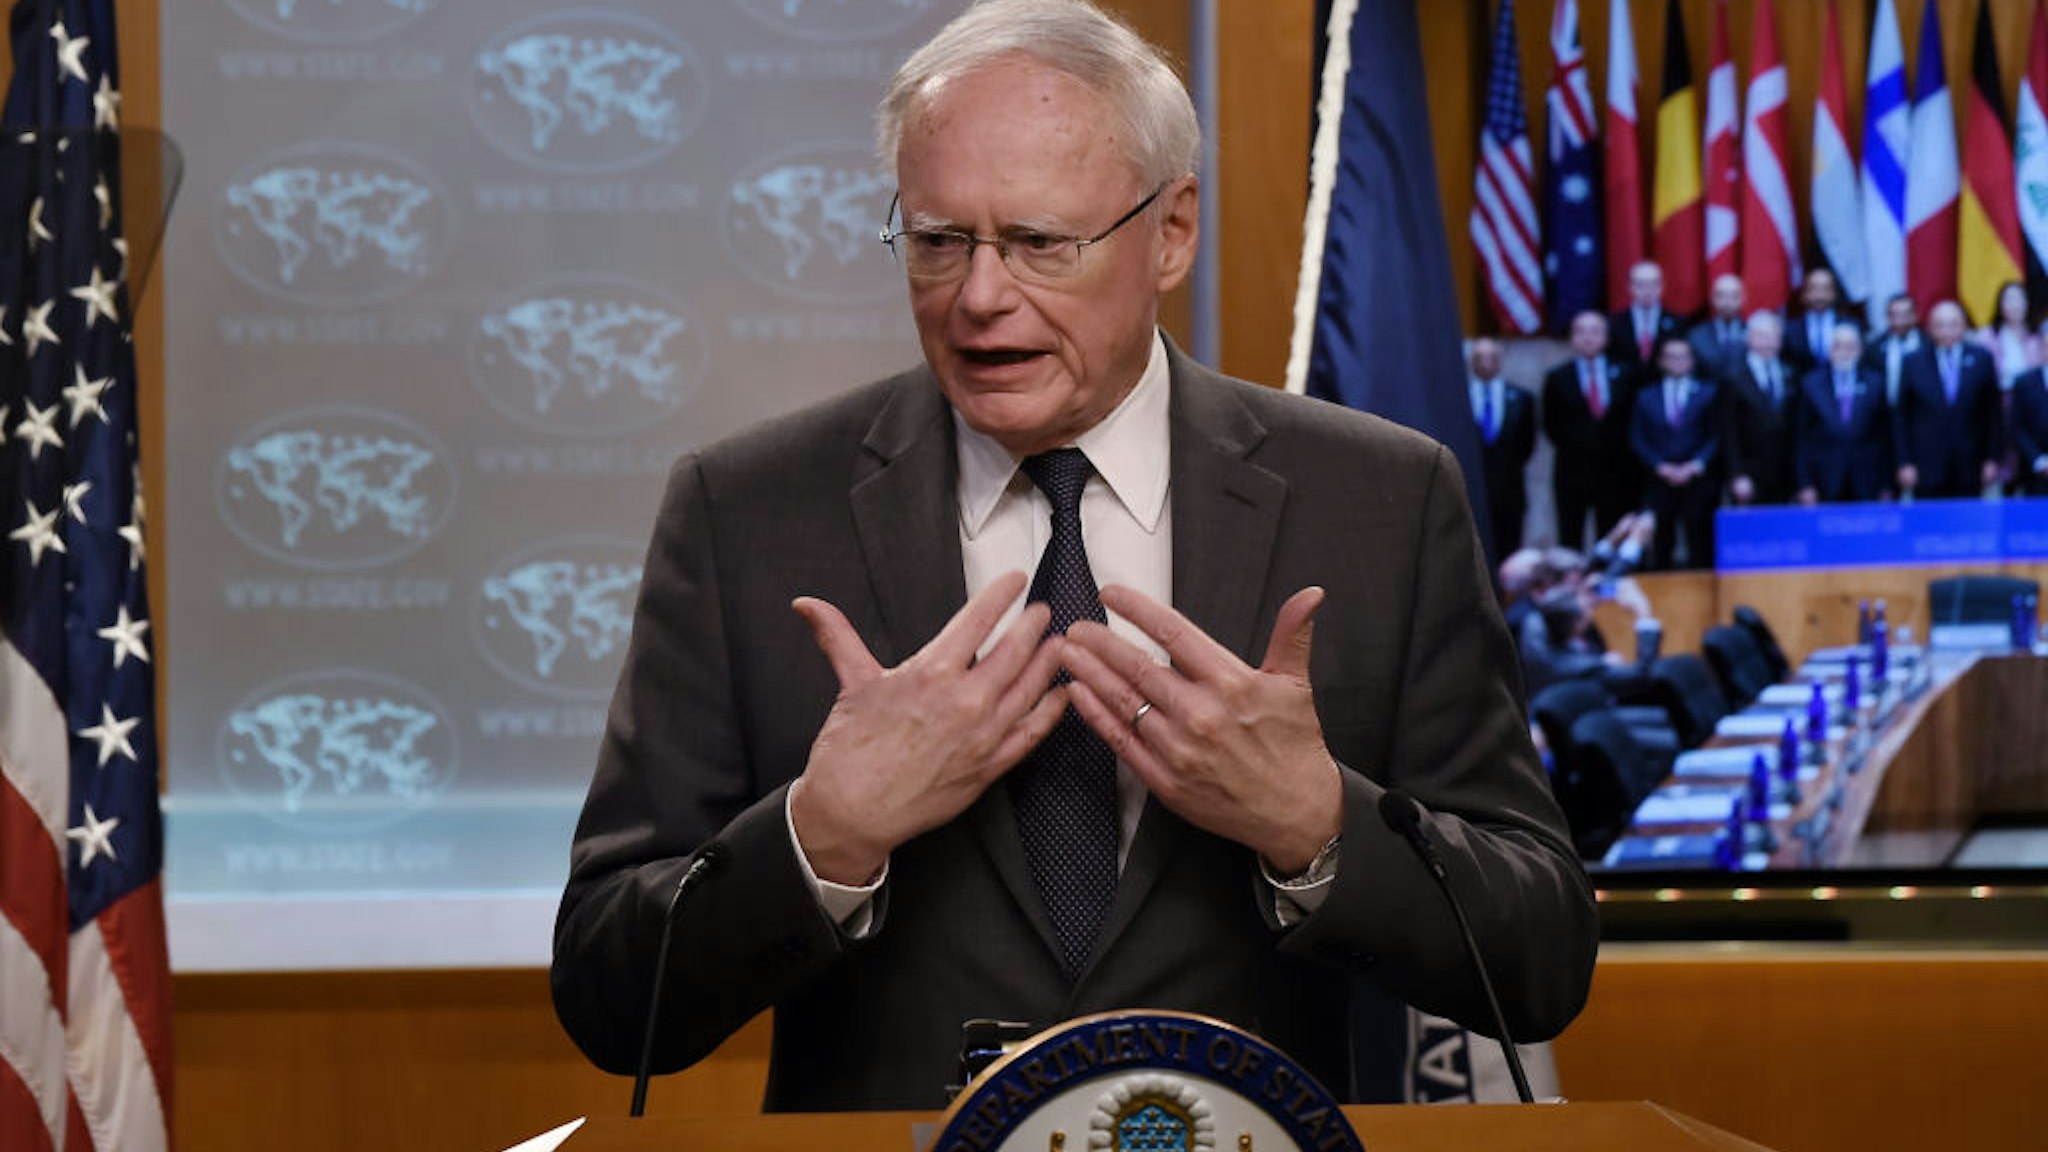 US special envoy for Syria and the Global Coalition to Defeat ISIS Jim Jeffrey speaks during a briefing at the State Department in Washington, DC, on November 14, 2019.